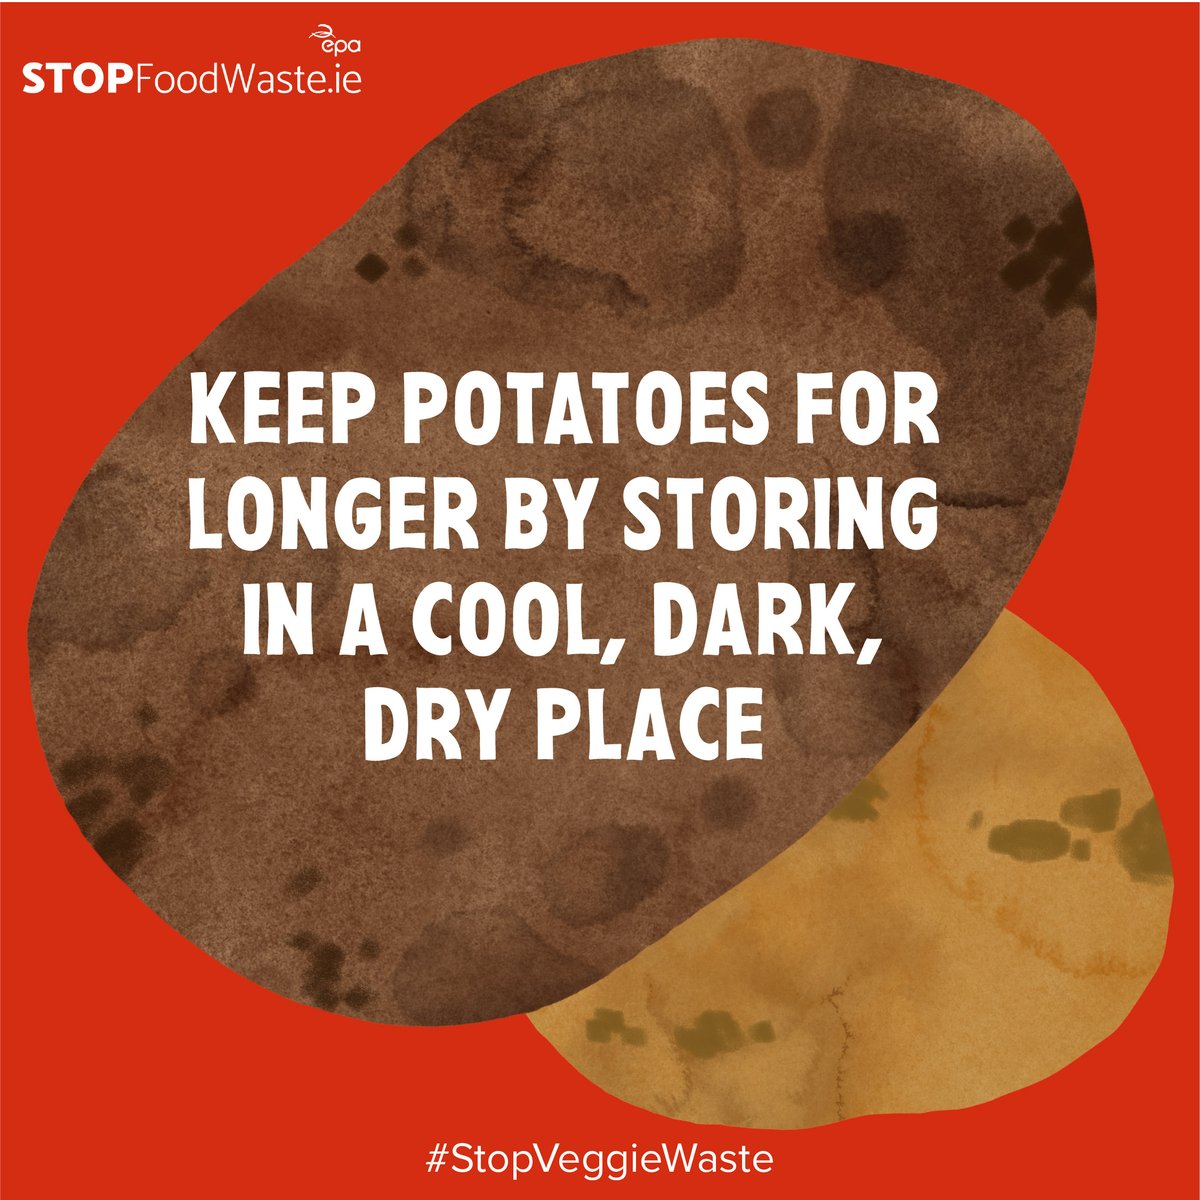 Keep potatoes for longer! Store spuds in a cool, dark and dry place. A cloth potato sack in a dark cupboard works well. #StopVeggiesWaste #StopFoodWaste